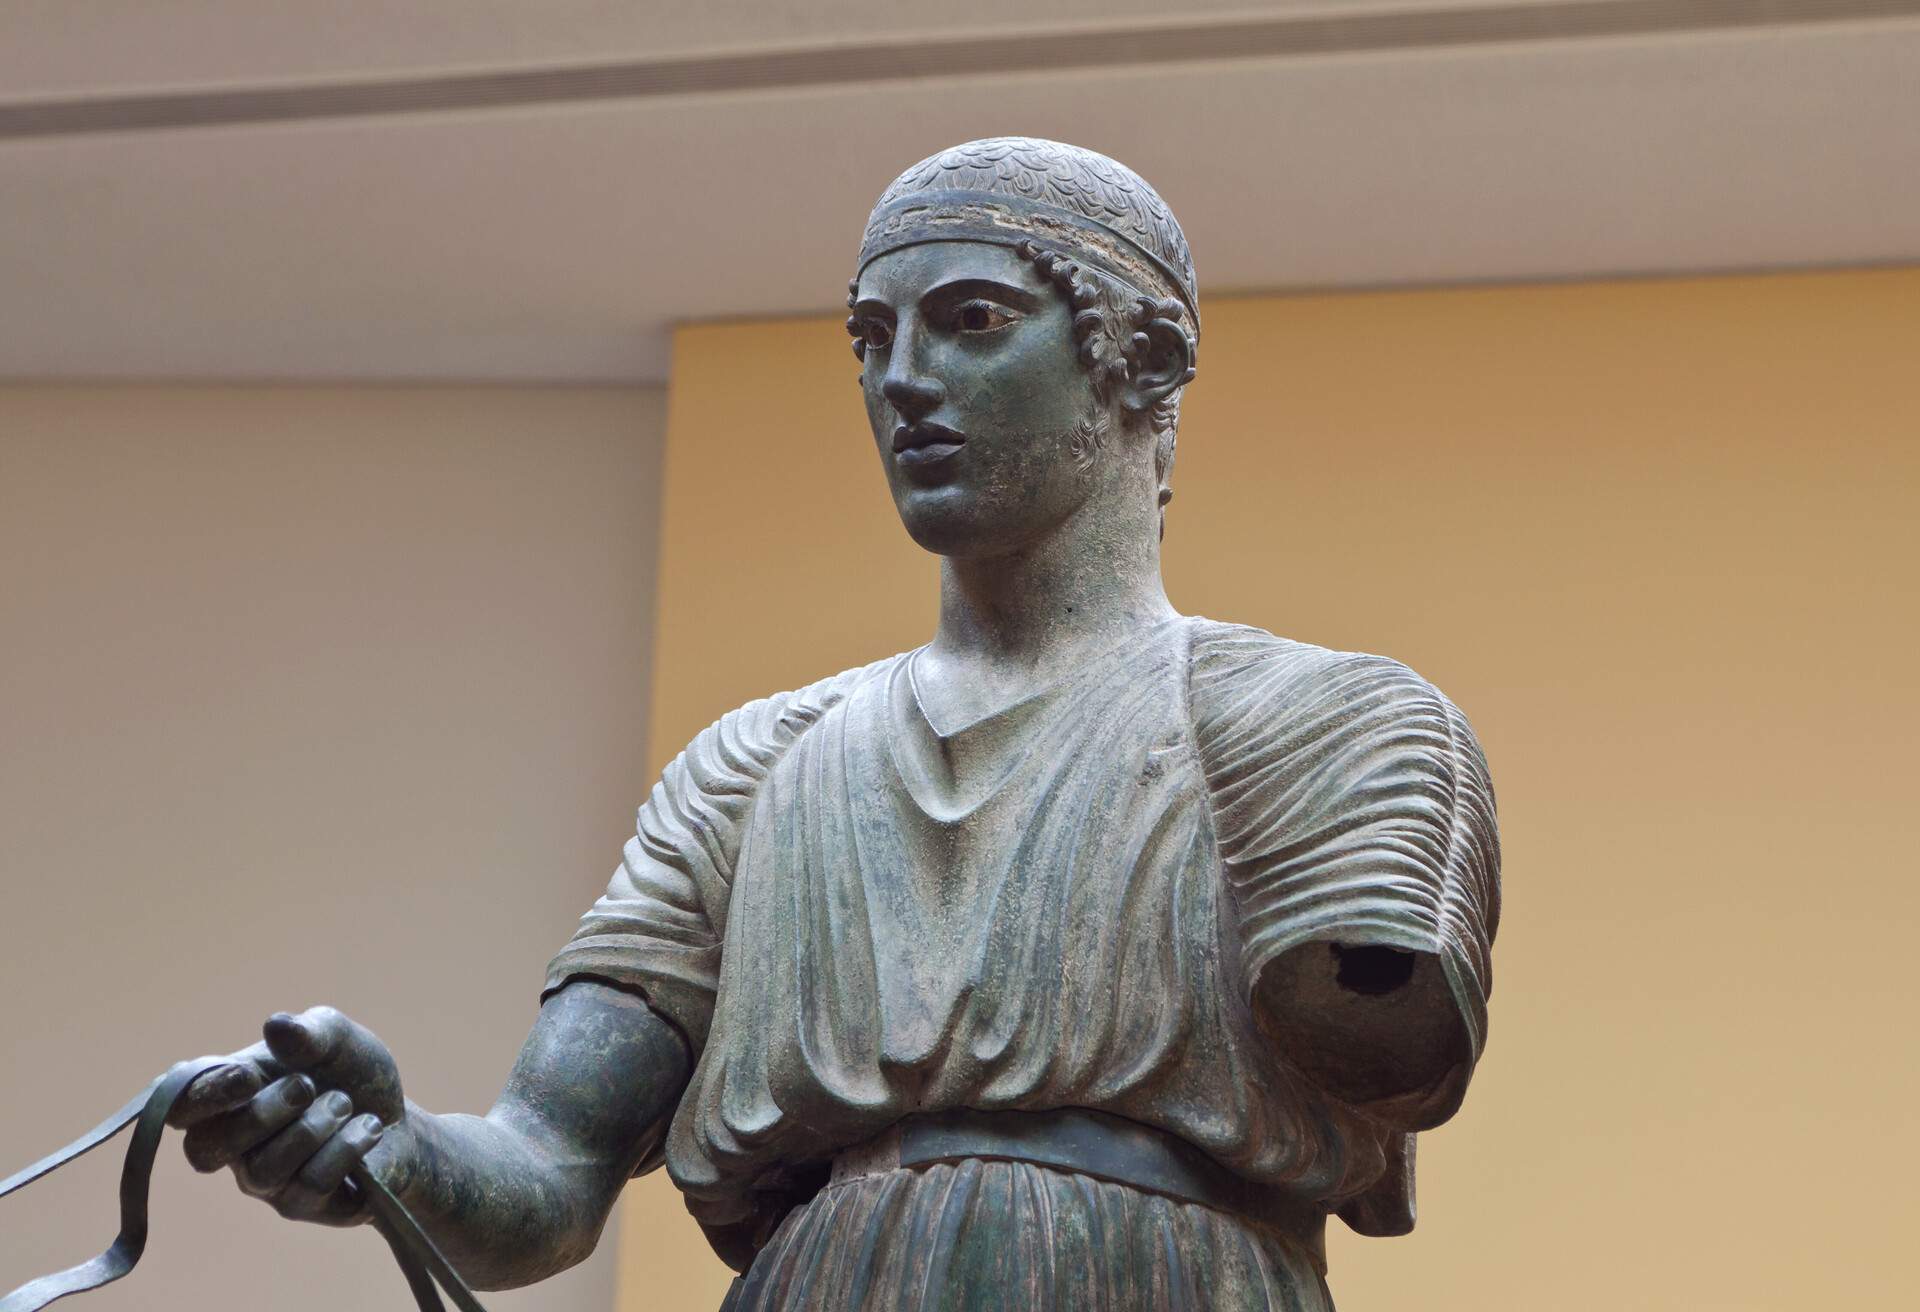 Charioteer statue located at Delphi museum in Greece.